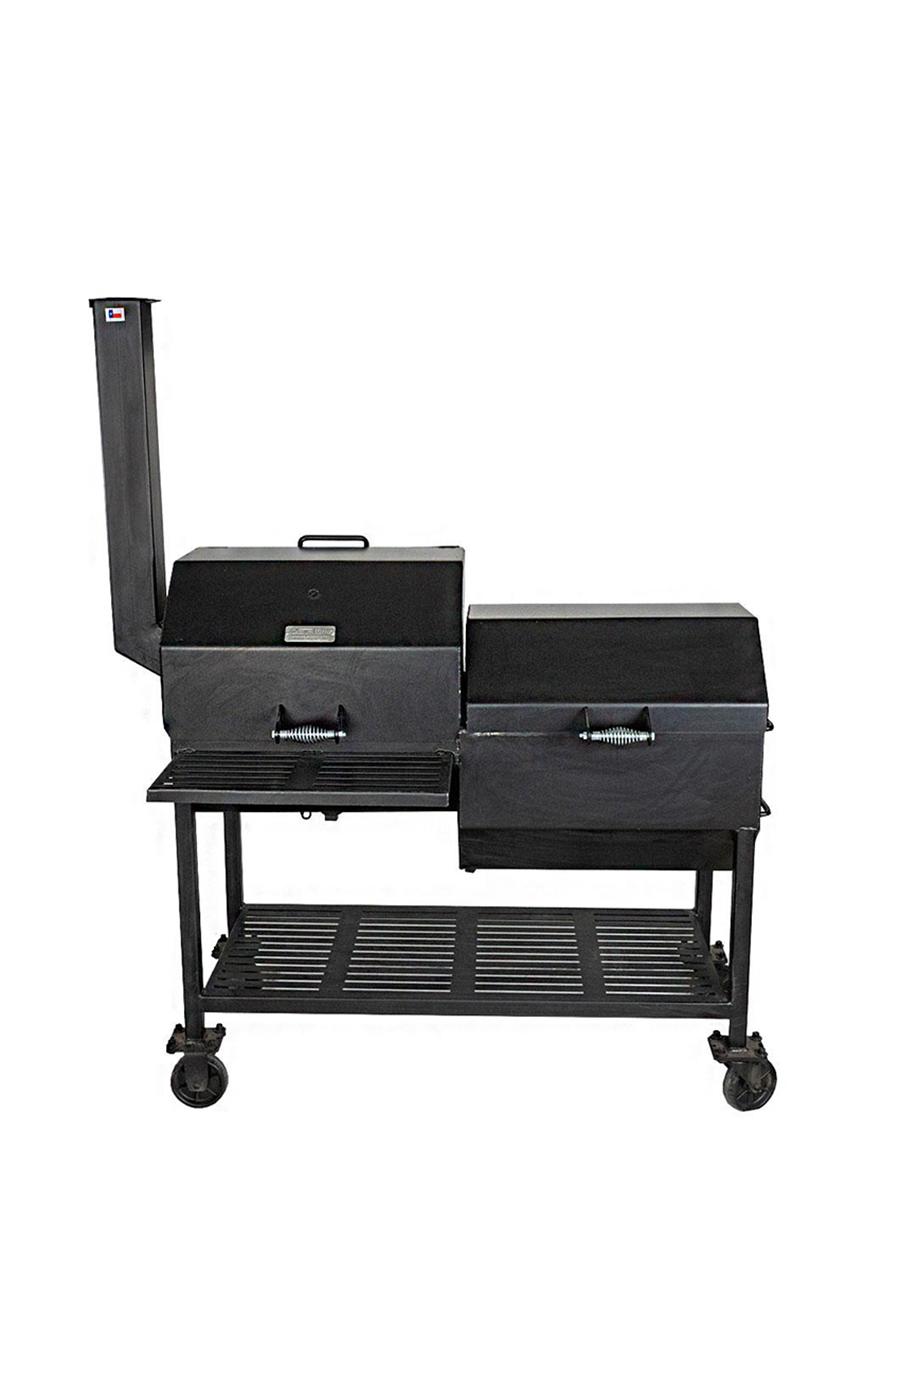 All Seasons Feeders 24" x 20" Charcoal BBQ Pit with Firebox; image 1 of 7